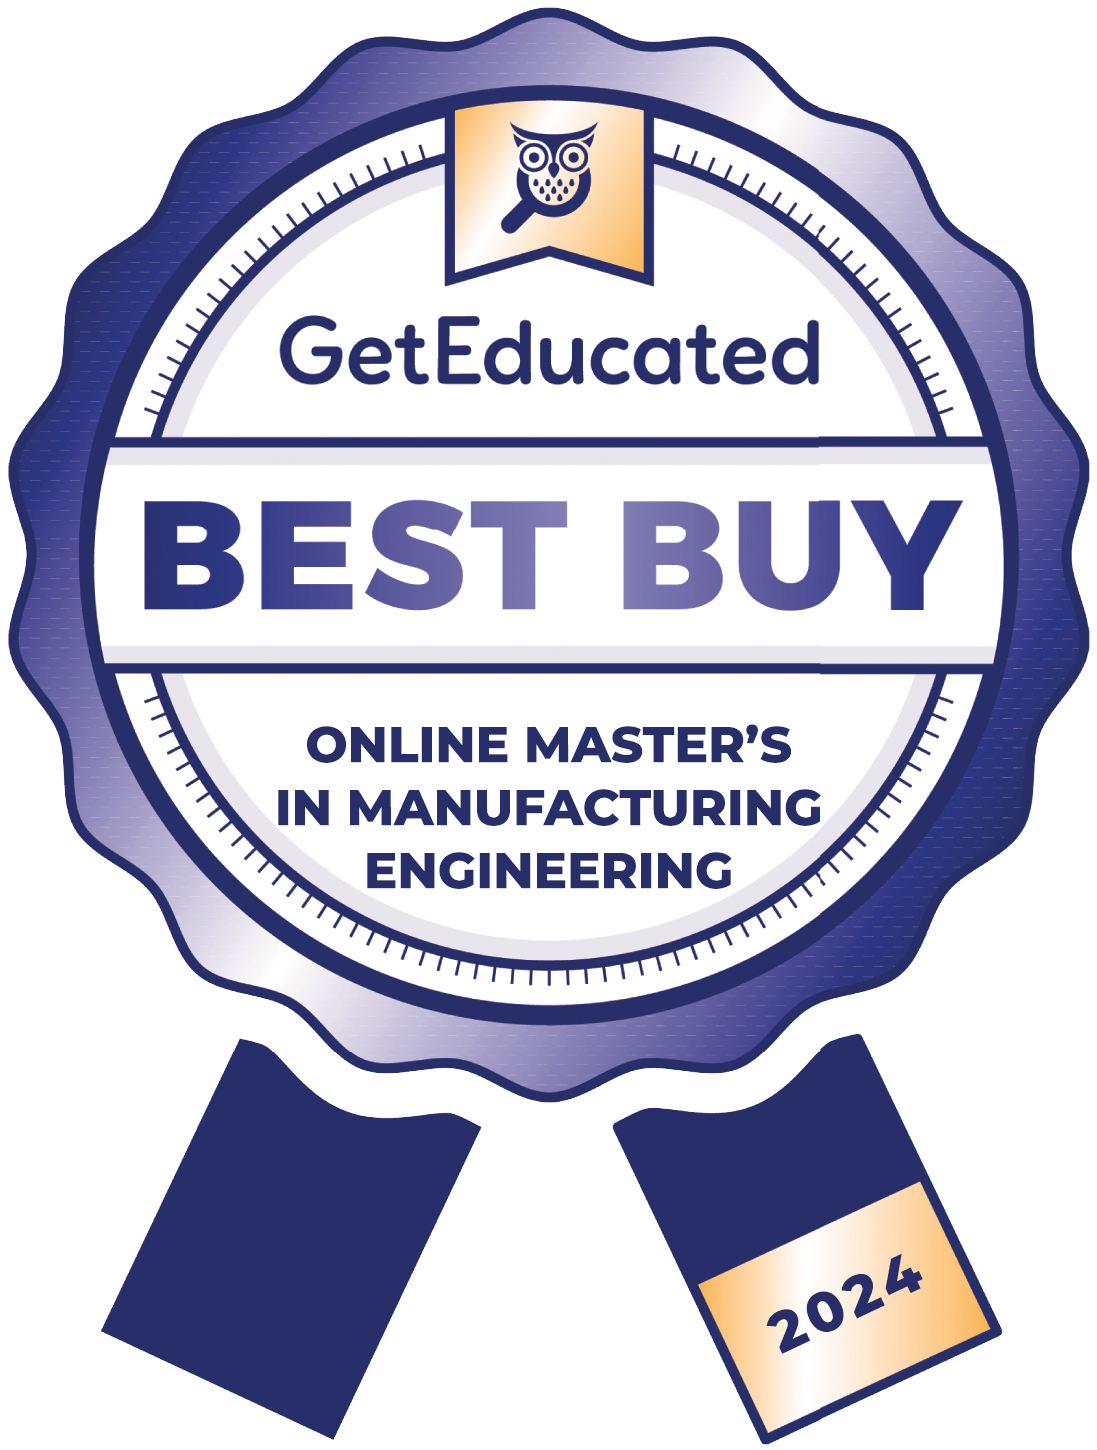 Rankings of the cheapest online master's in manufacturing engineering